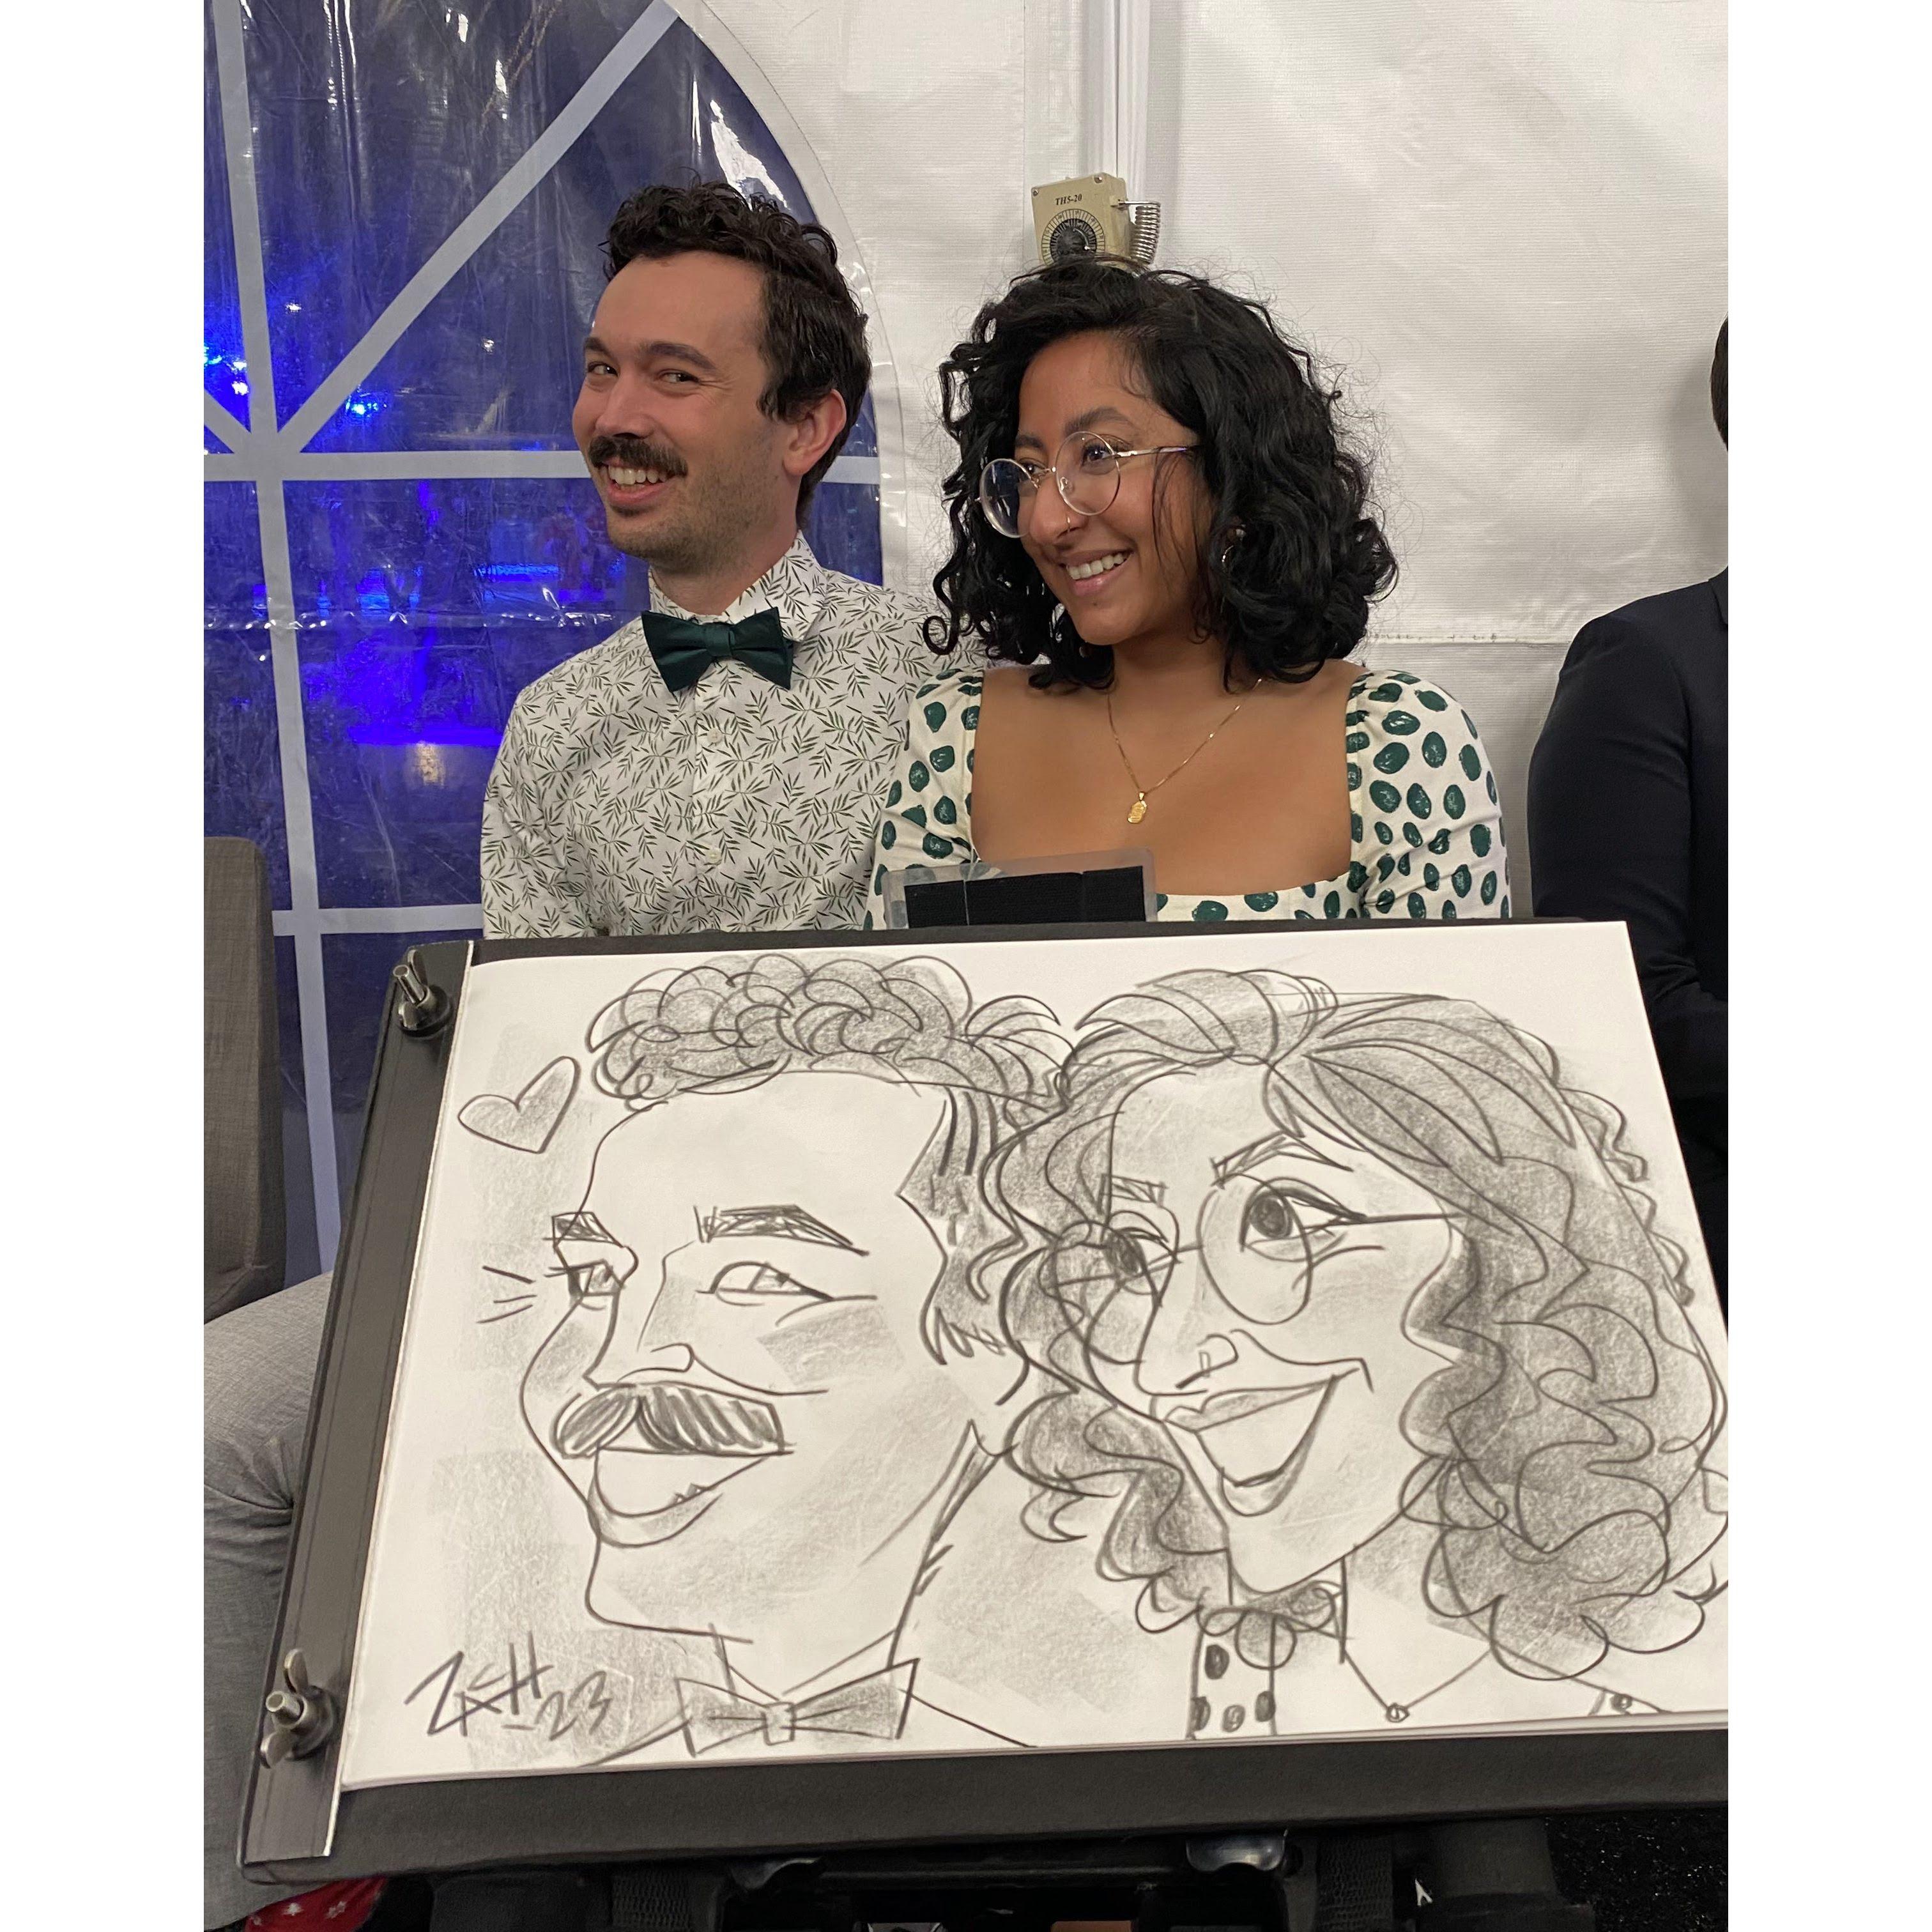 We were scared at first when the artist was first starting to draw us... but THANKFULLY they turned out pretty good!